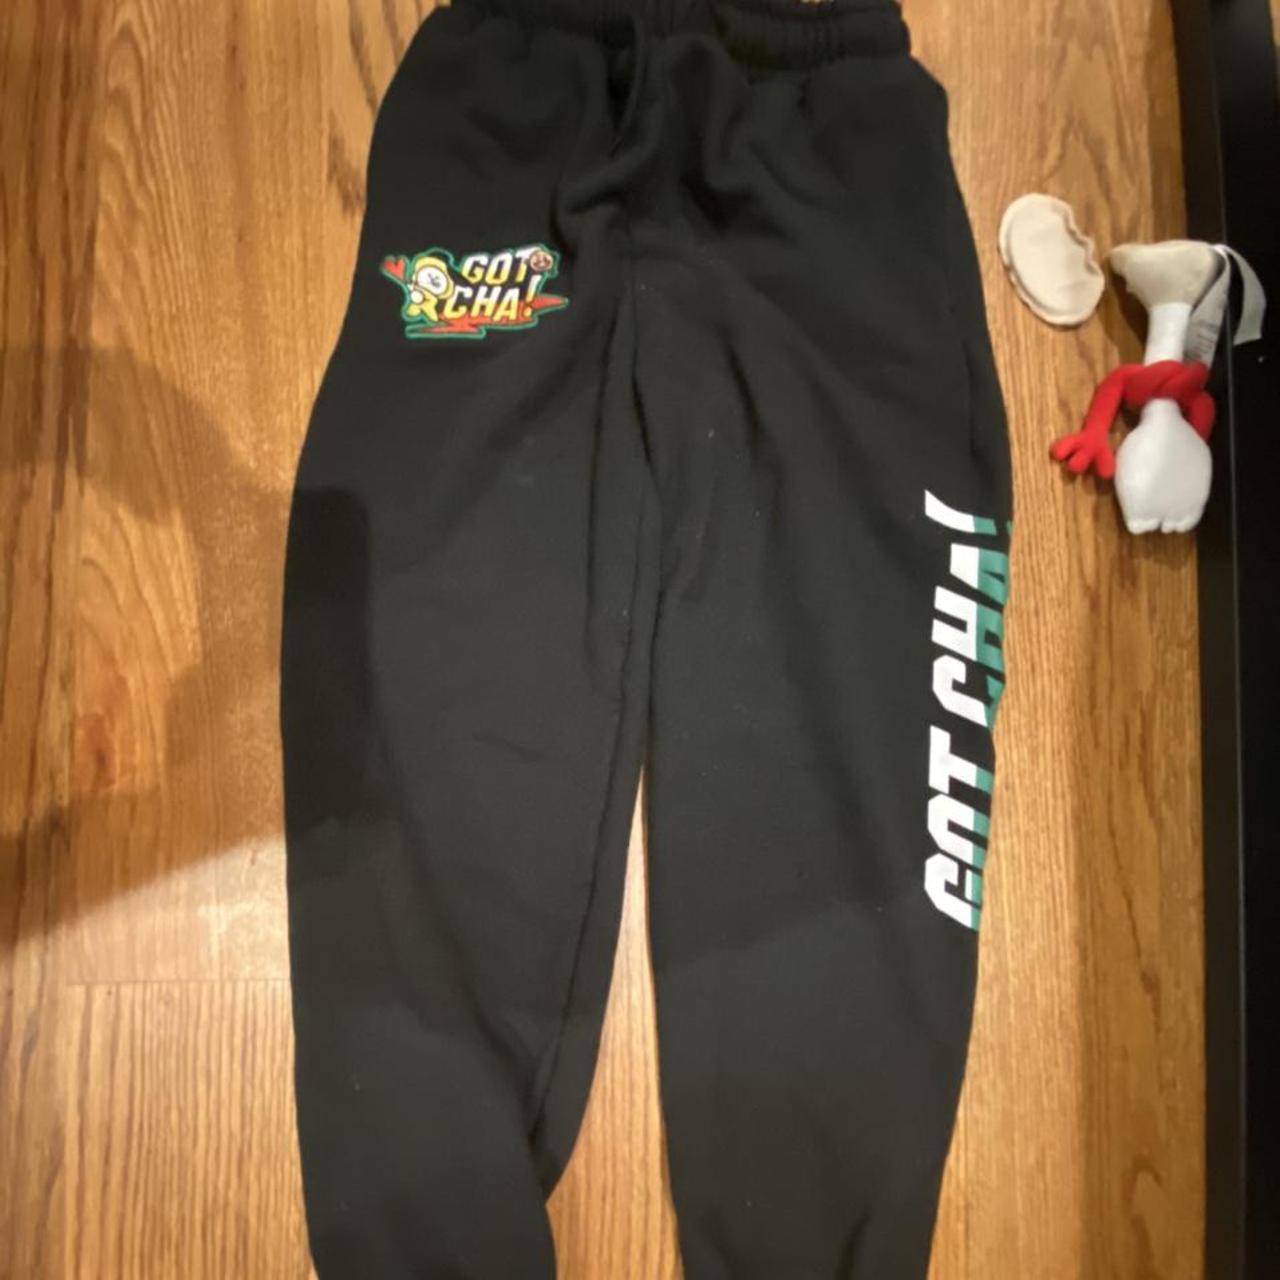 BT21 Sweatpants! Too small for me Doesn’t fit... - Depop